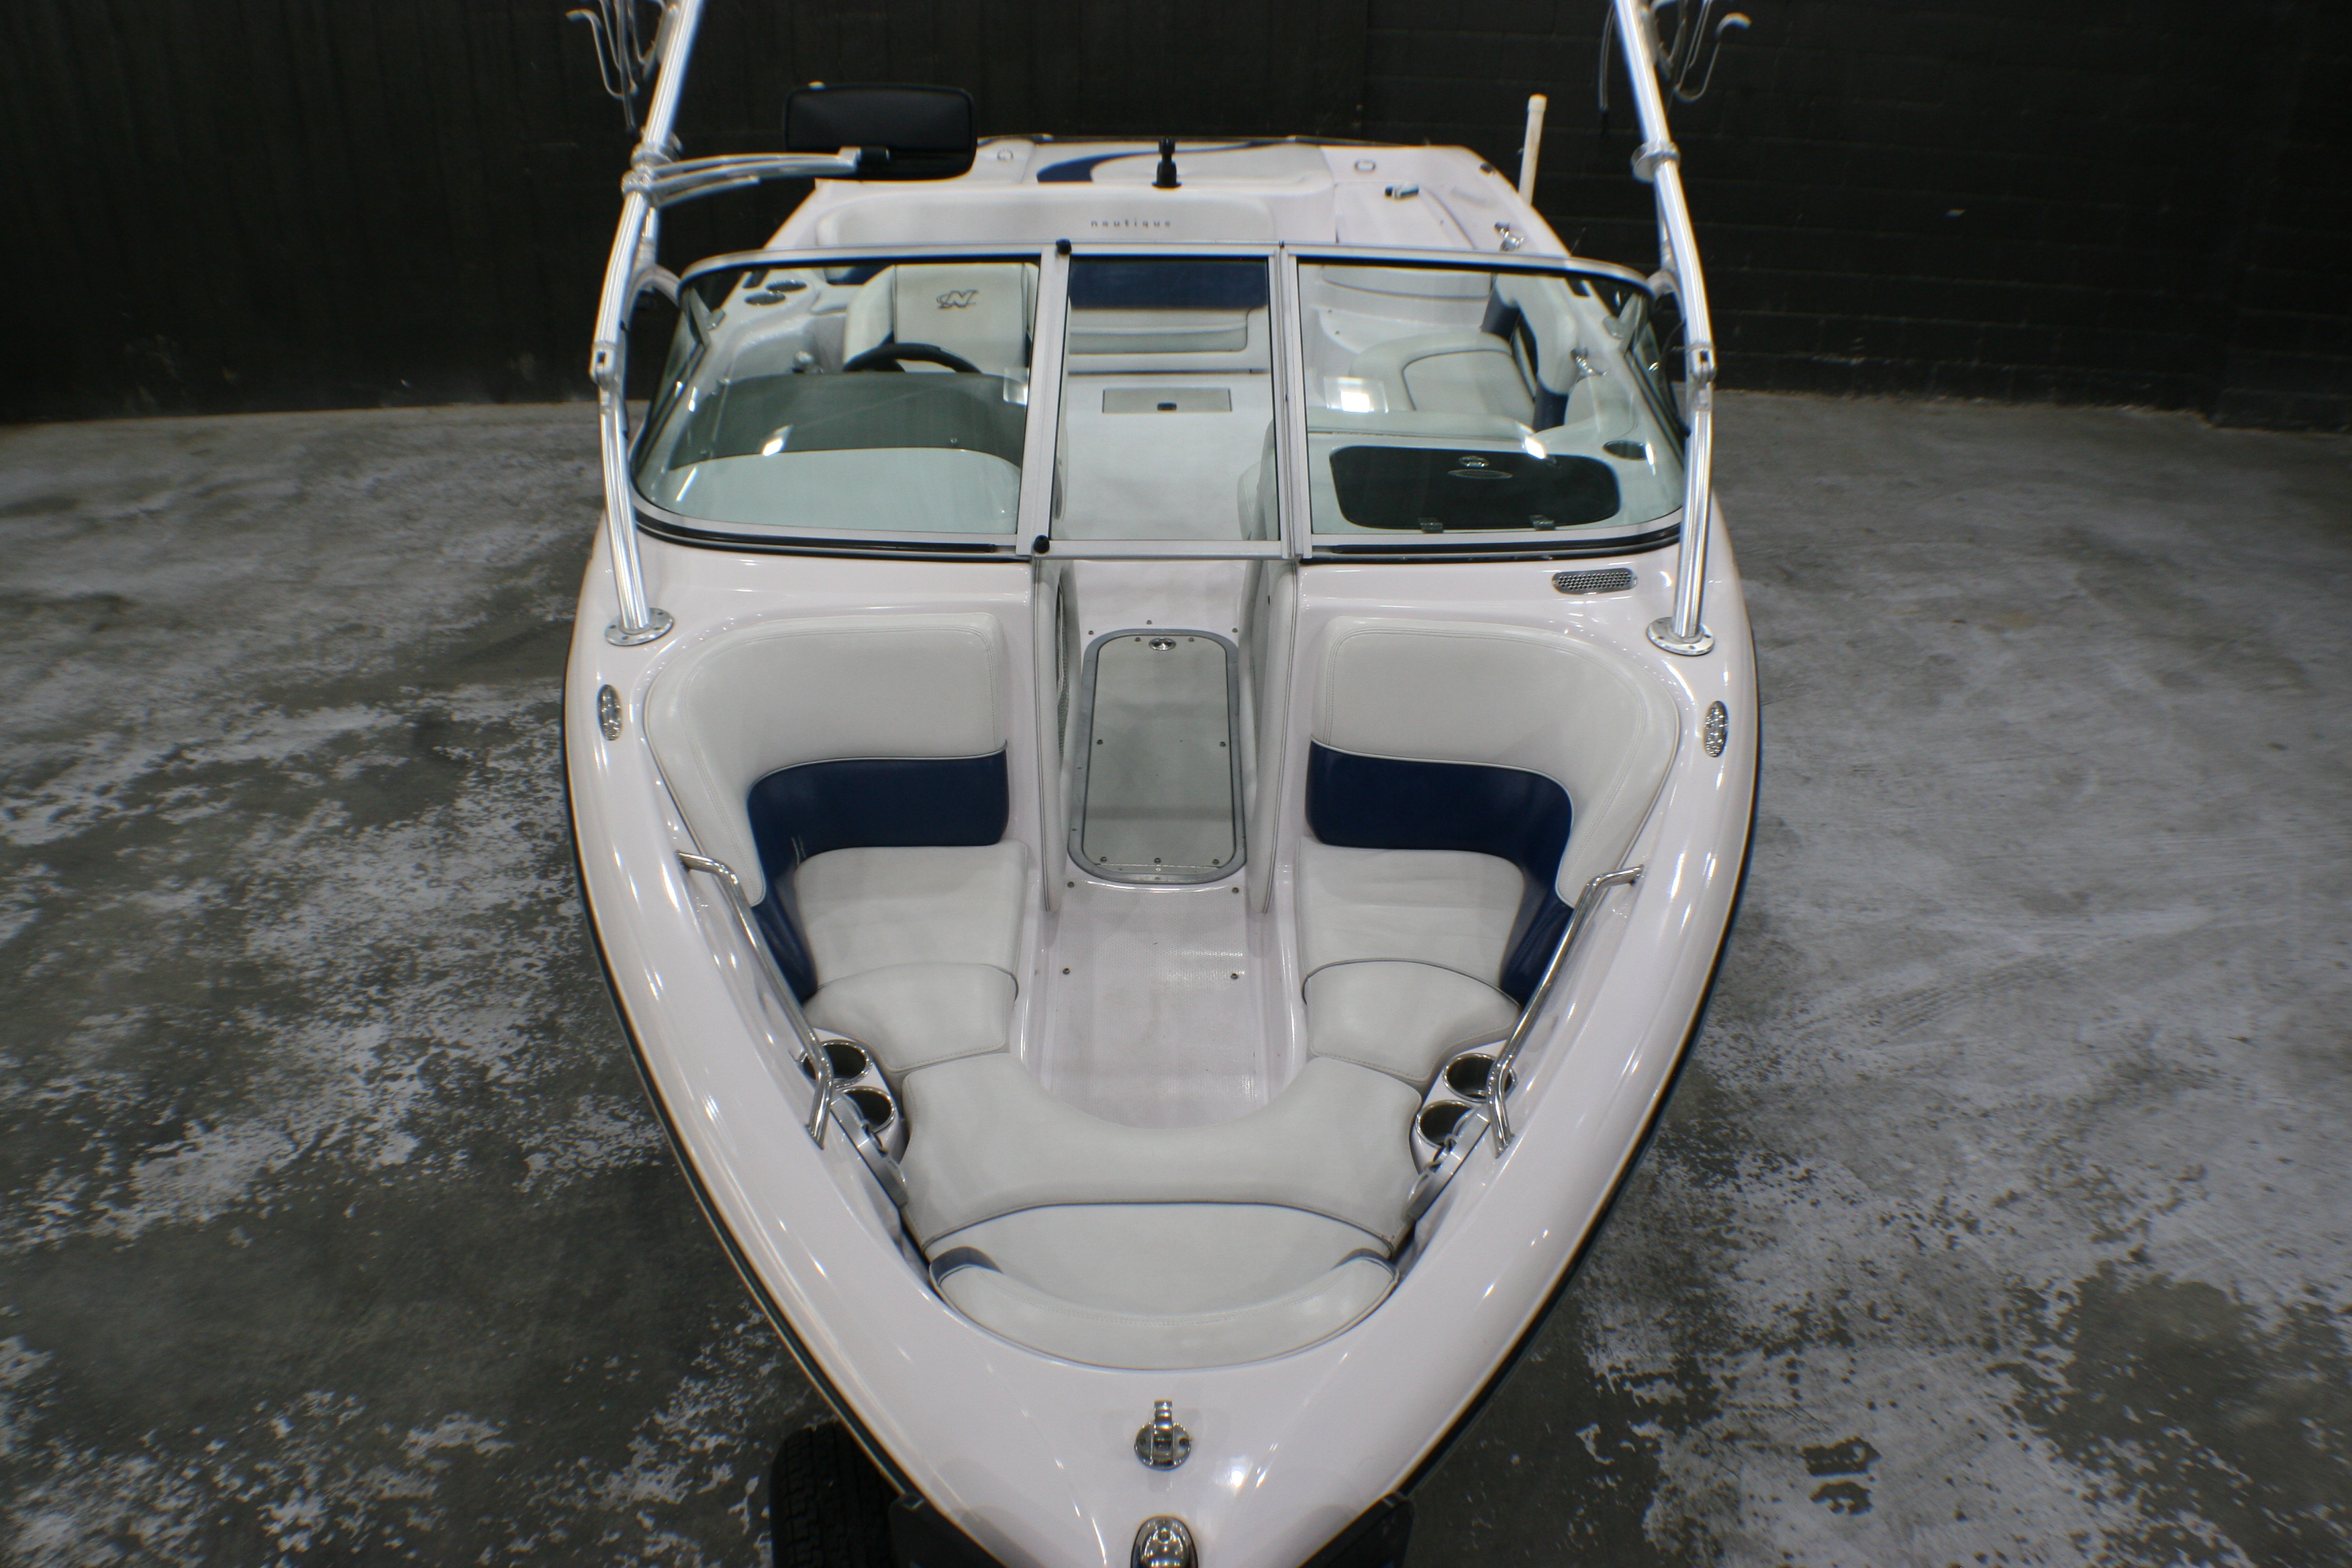 2006 Correct craft SV211TE Power boat for sale in McQueeney, TX - image 3 